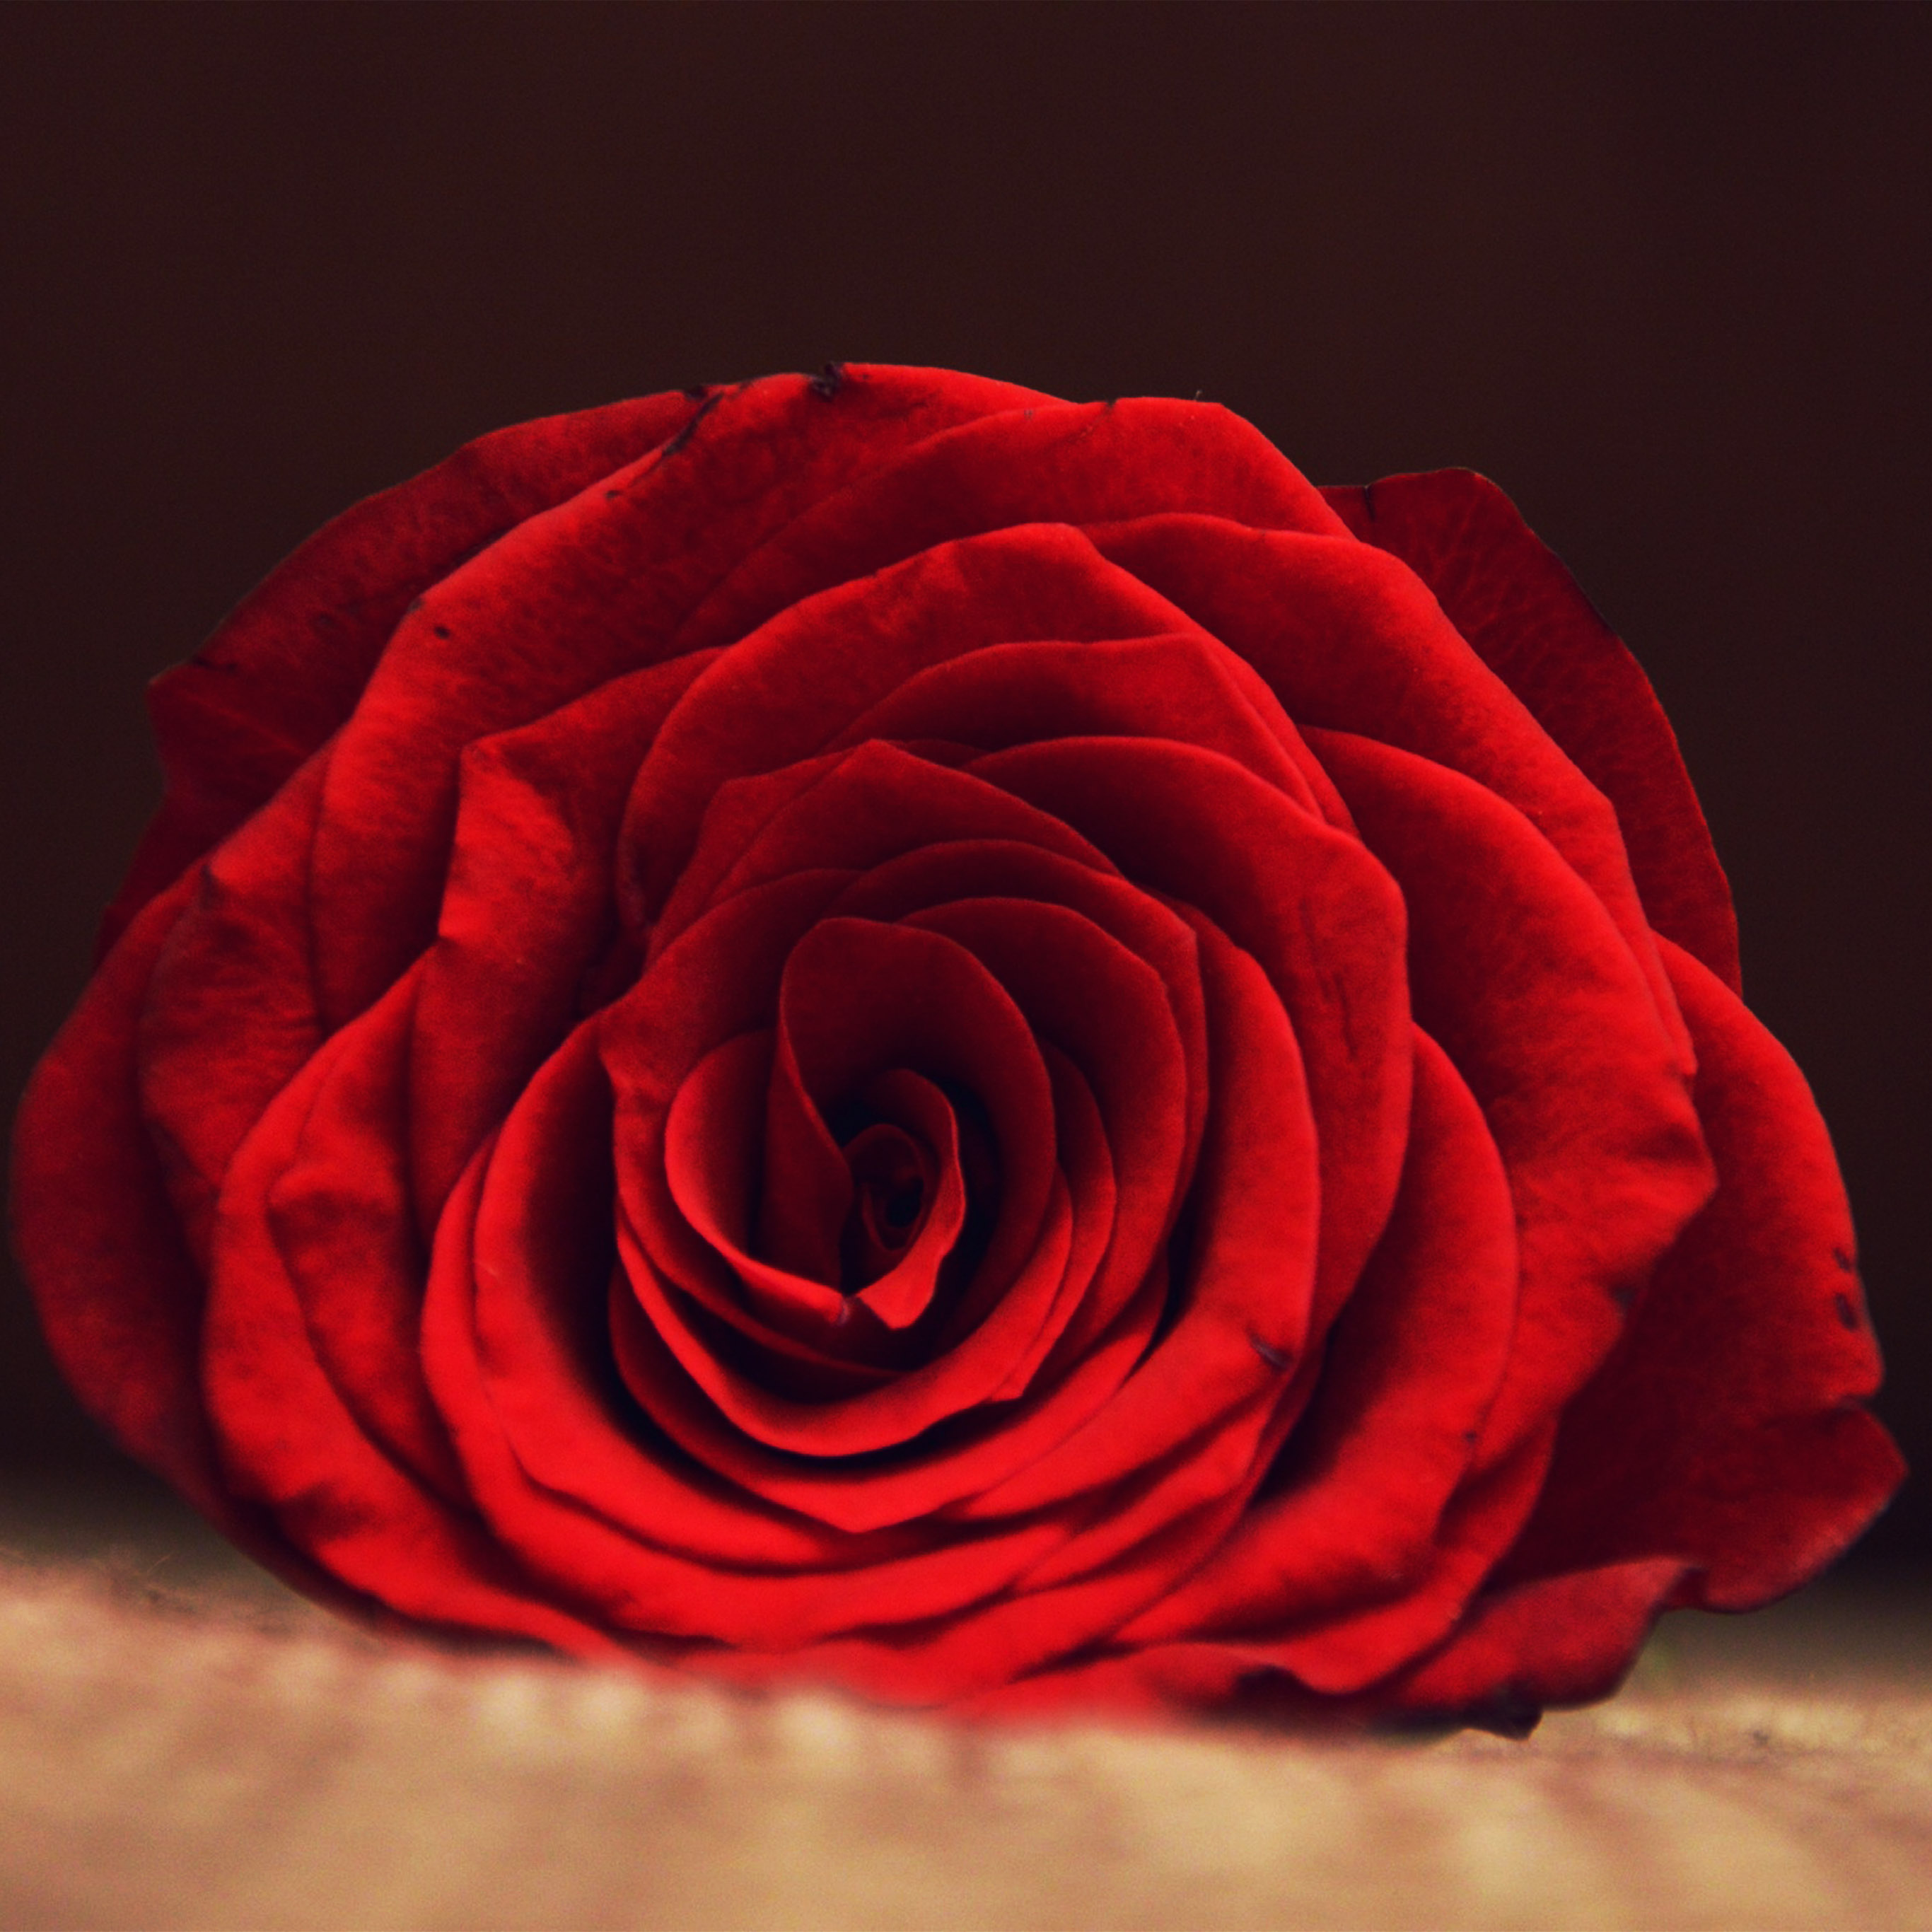 Android wallpaper. rose flower red spring love hot